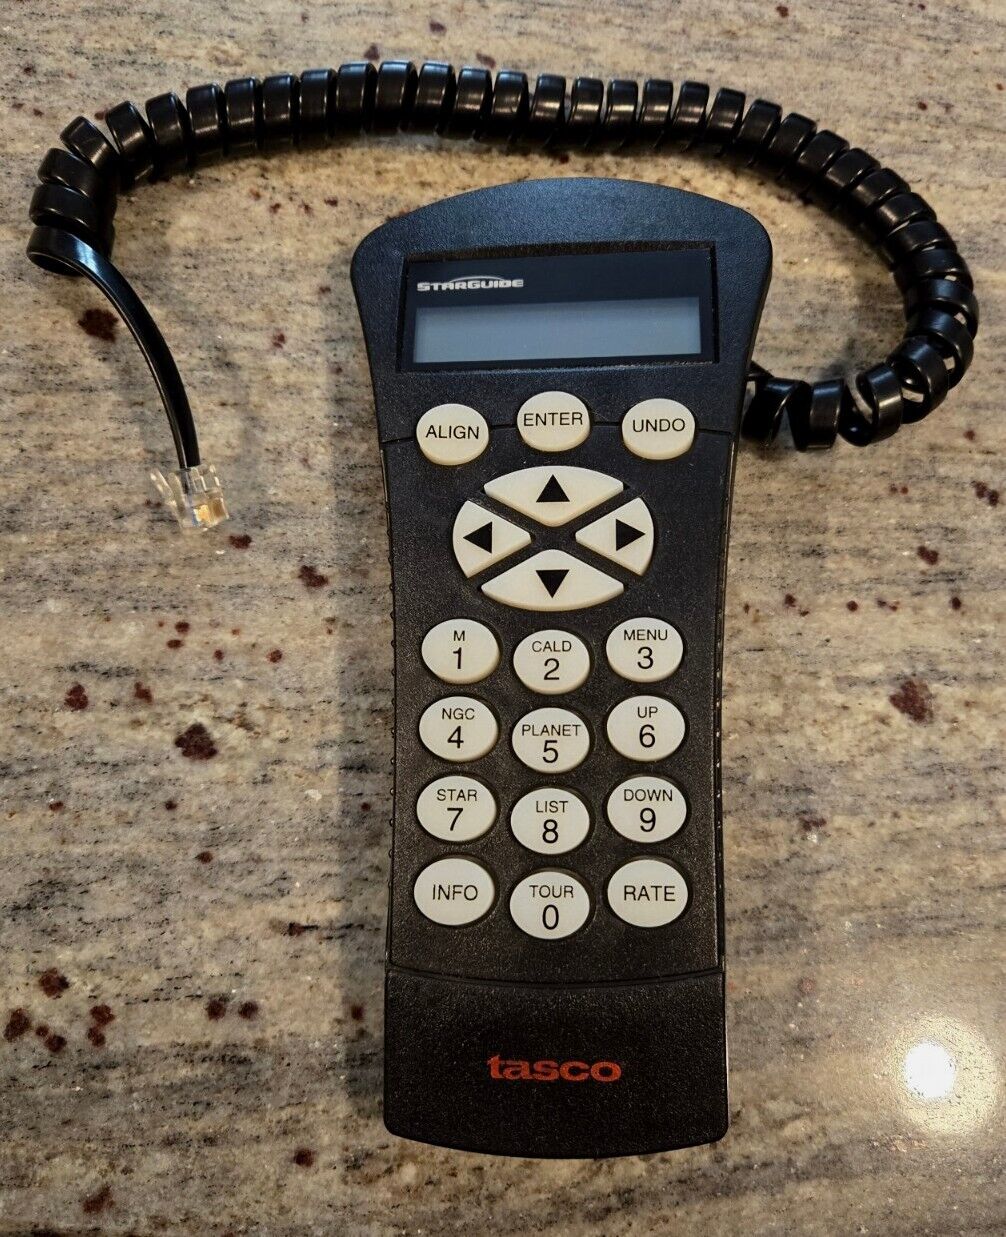 OEM Tasco Starguide Computerized Motorized Telescope Wired Remote Control TESTED